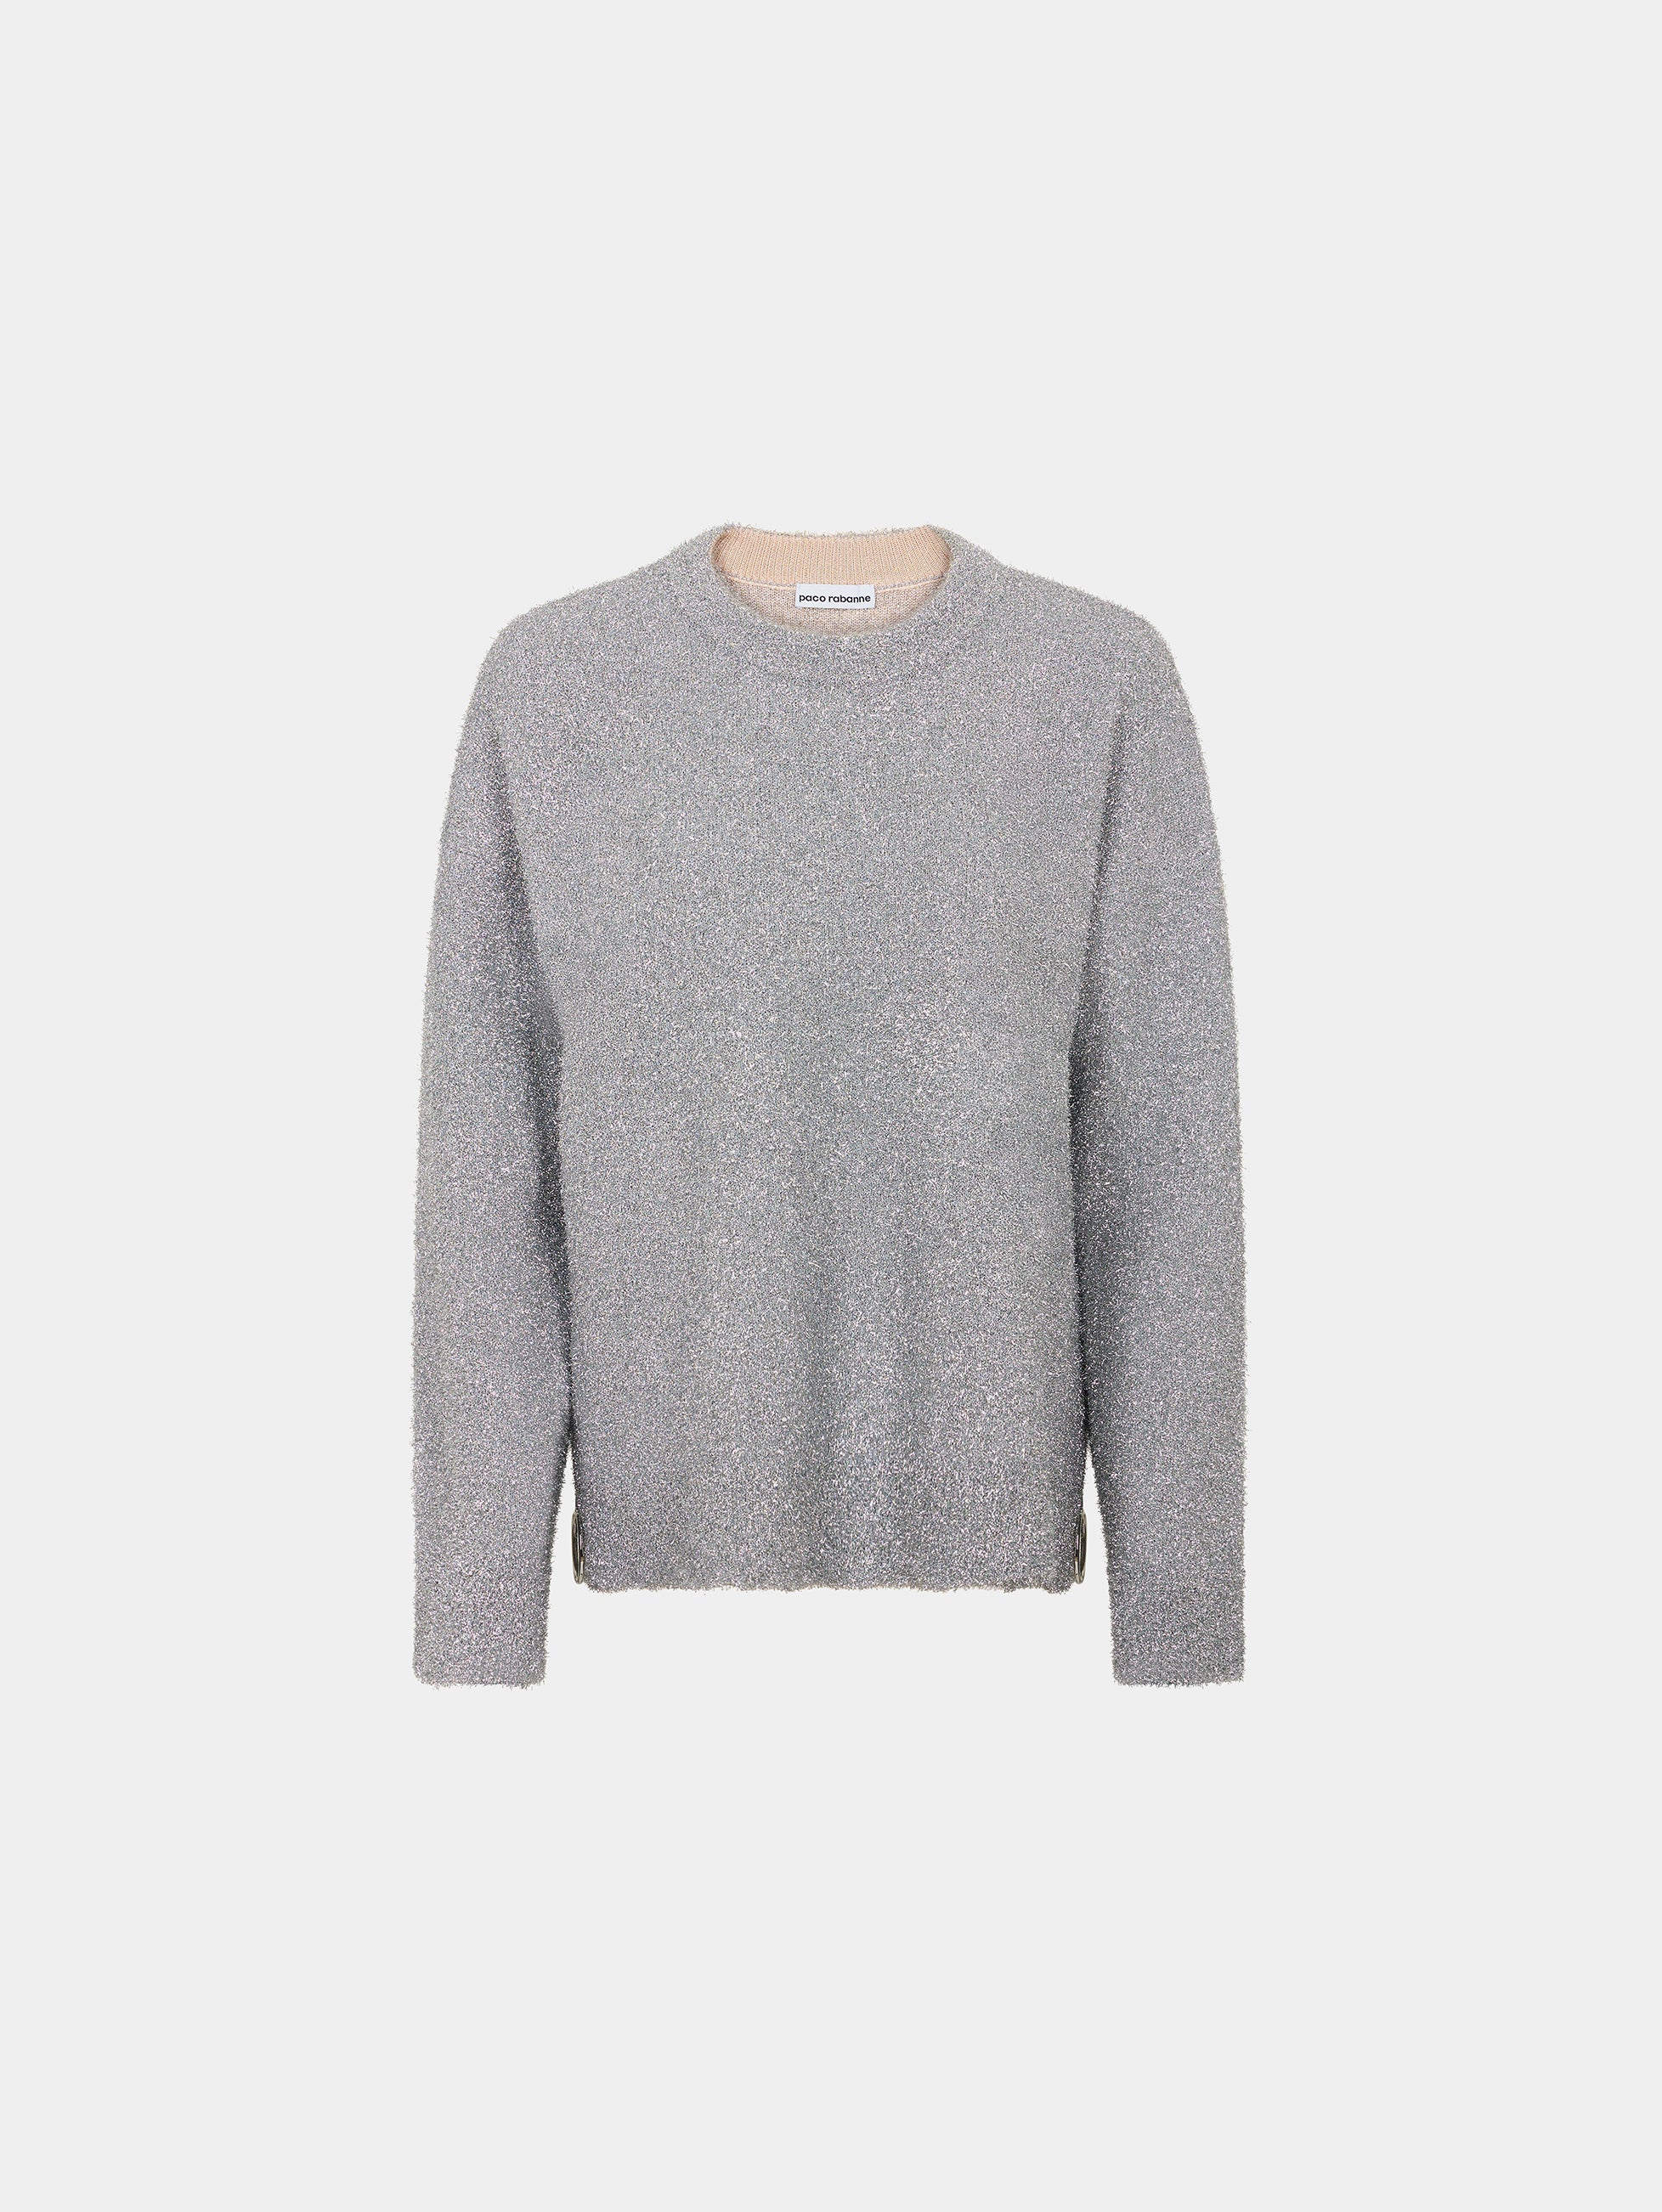 Sweater with silver metalized effect | Rabanne